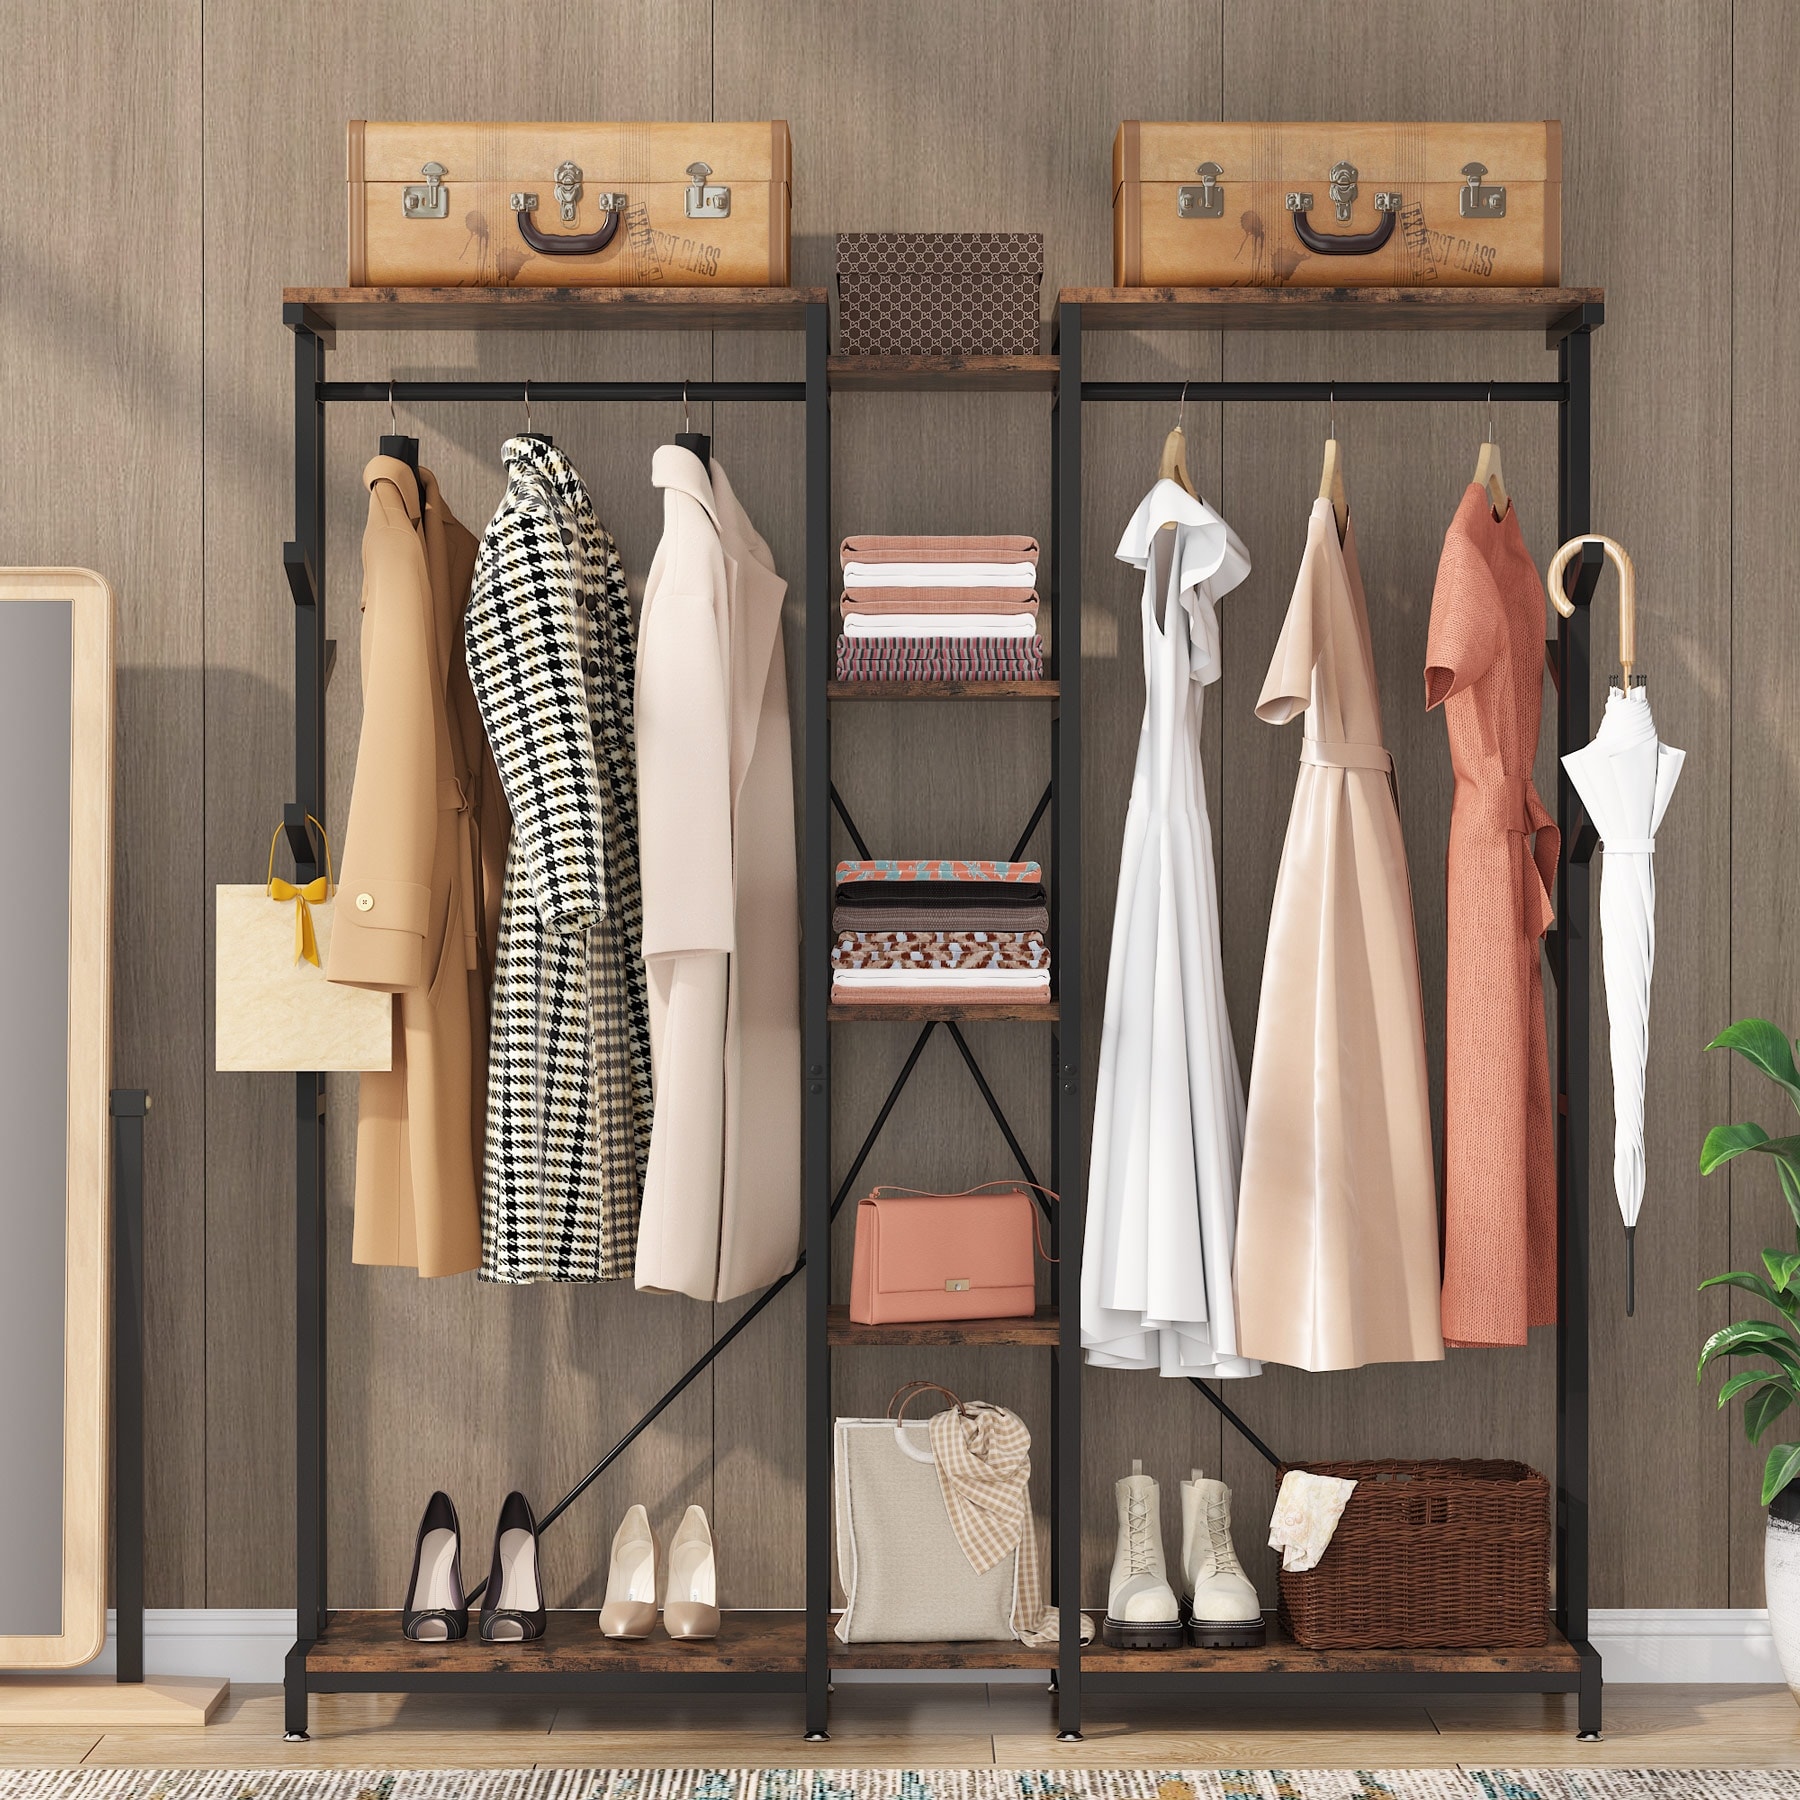 https://ak1.ostkcdn.com/images/products/is/images/direct/8721764df8247b4adde588cf1cf777c5c8efee99/Large-Freestanding-Clothes-Closet-Rack-with-Hanging-Rod-and-Storges-Shelevs.jpg